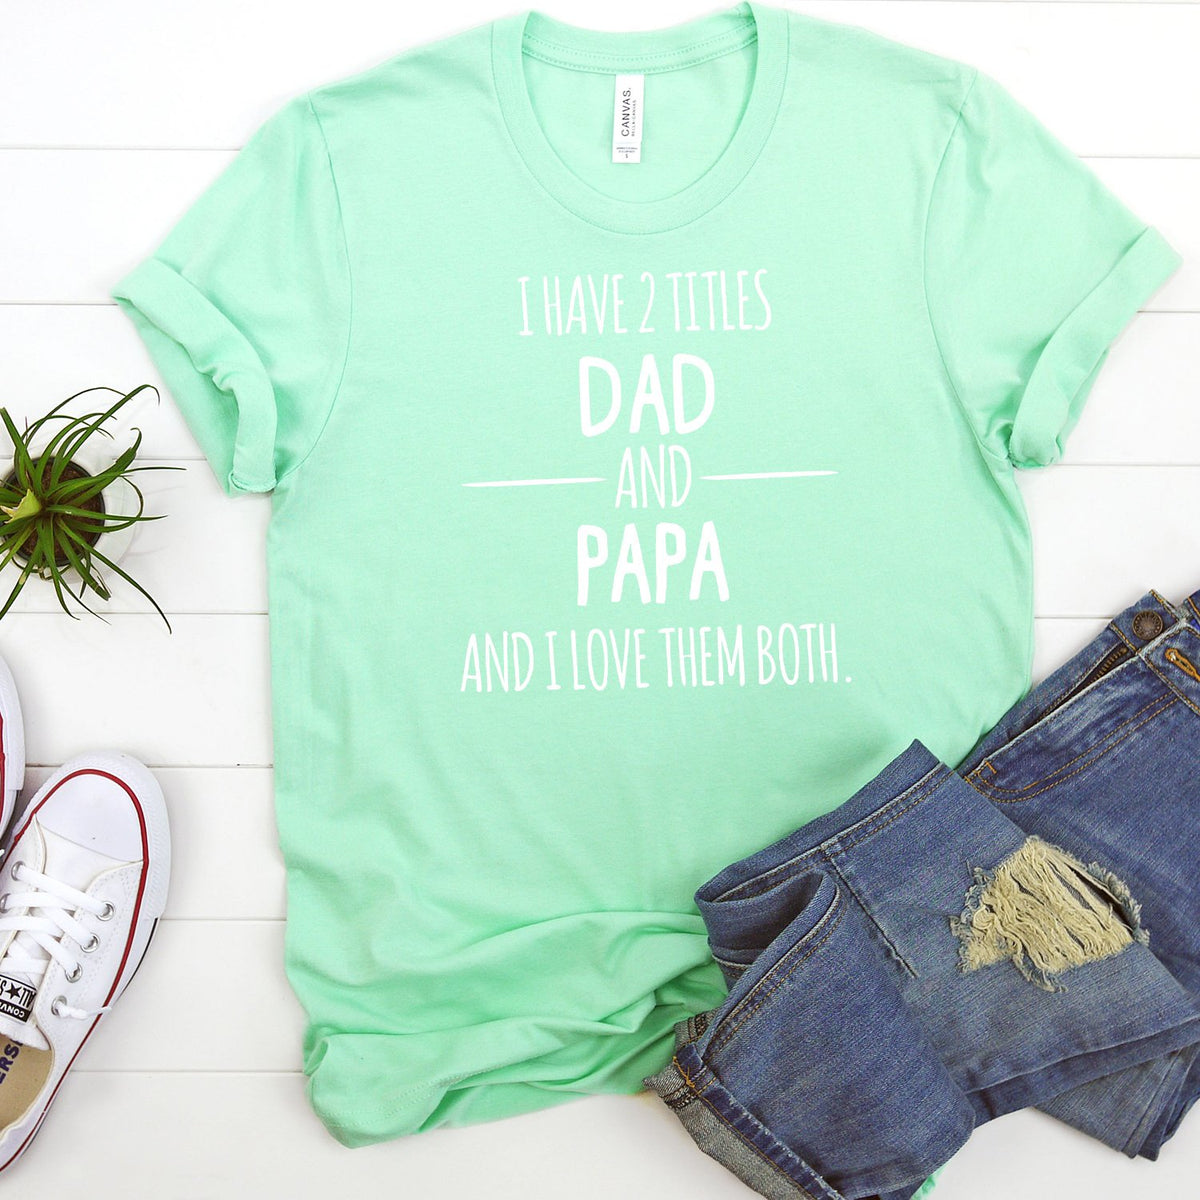 I Have 2 Titles Dad and Papa and I Love Them Both - Short Sleeve Tee Shirt